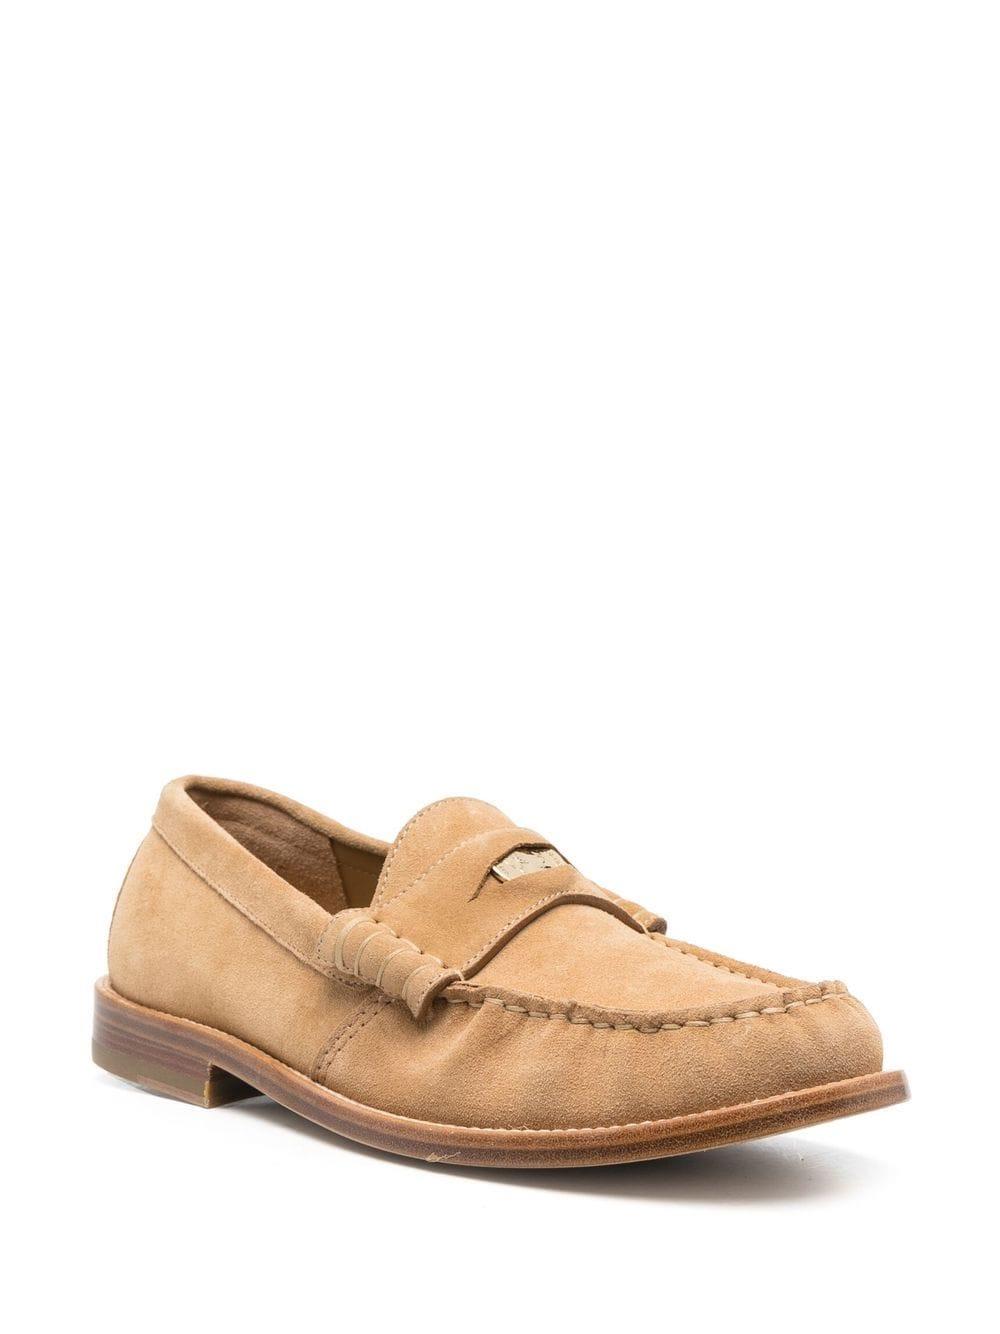 RHUDE suede penny loafers - Brown